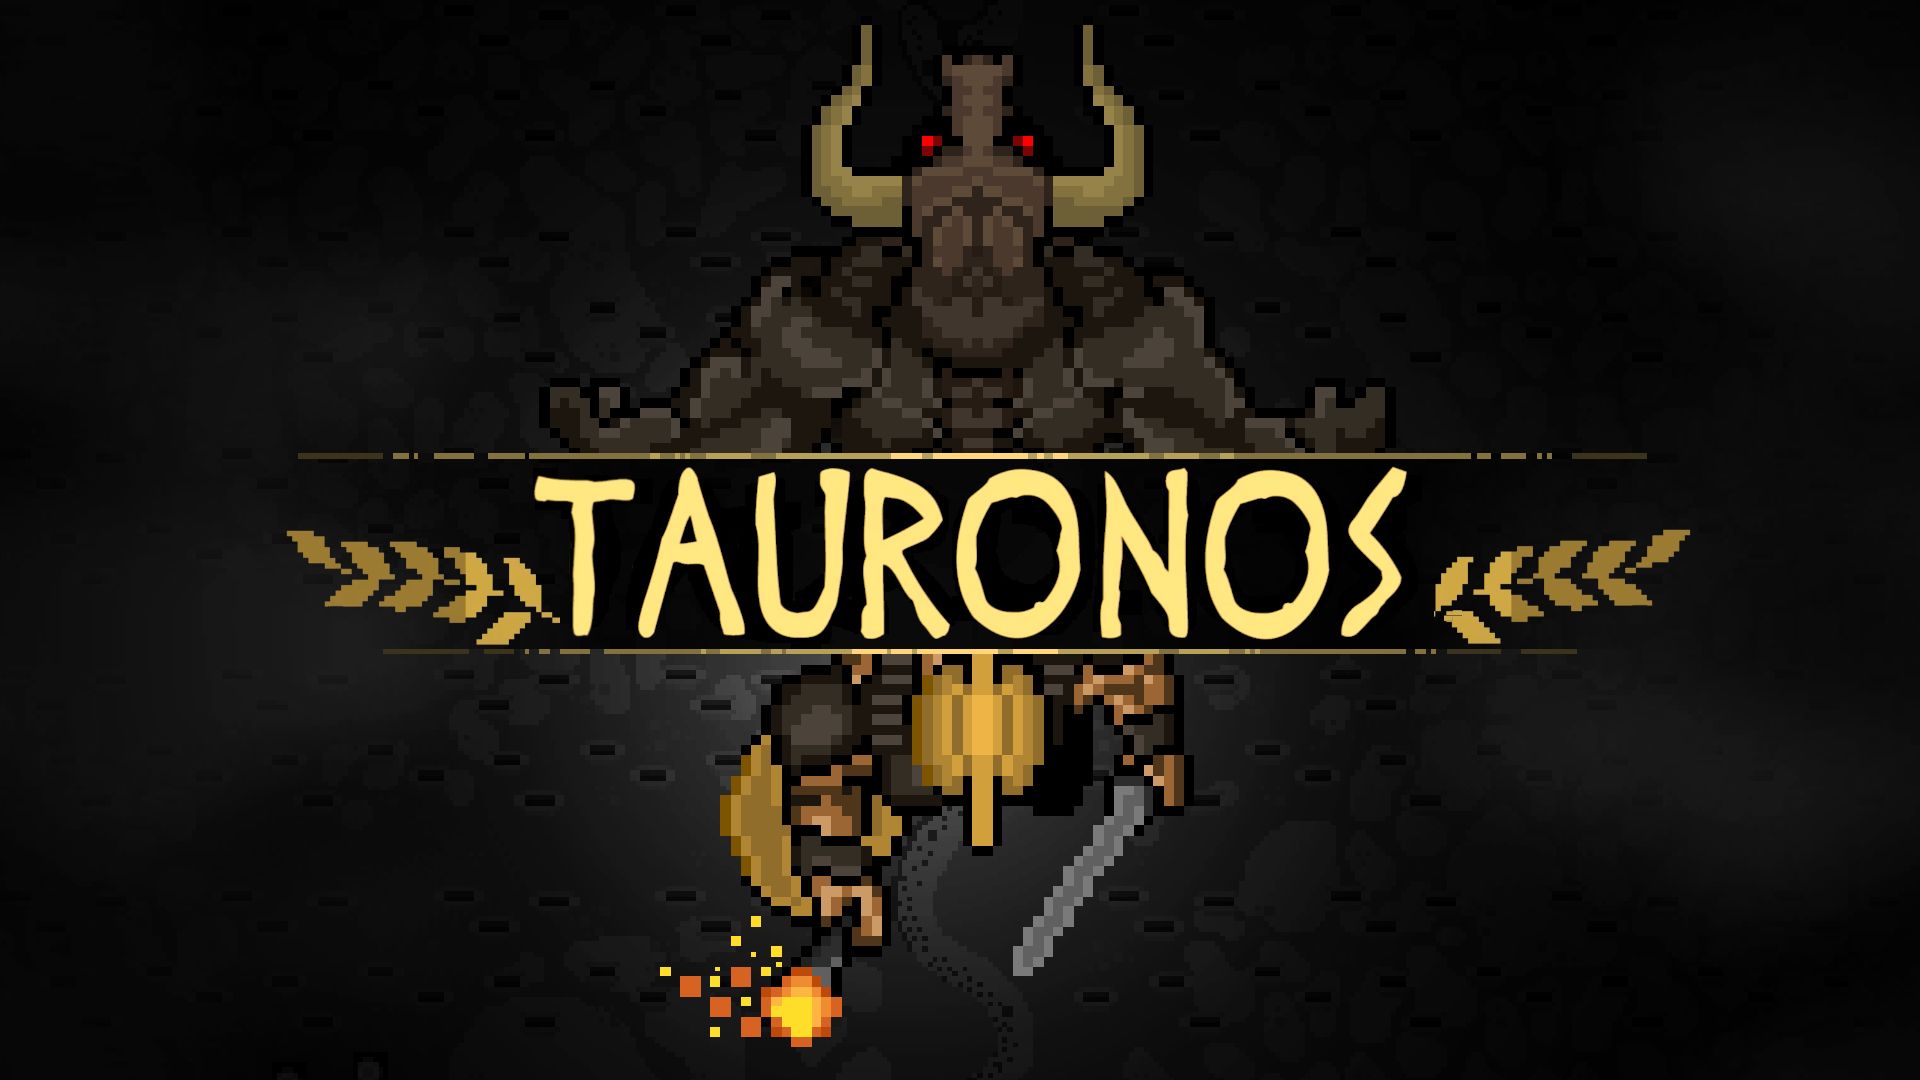 Competition: TAURONOS